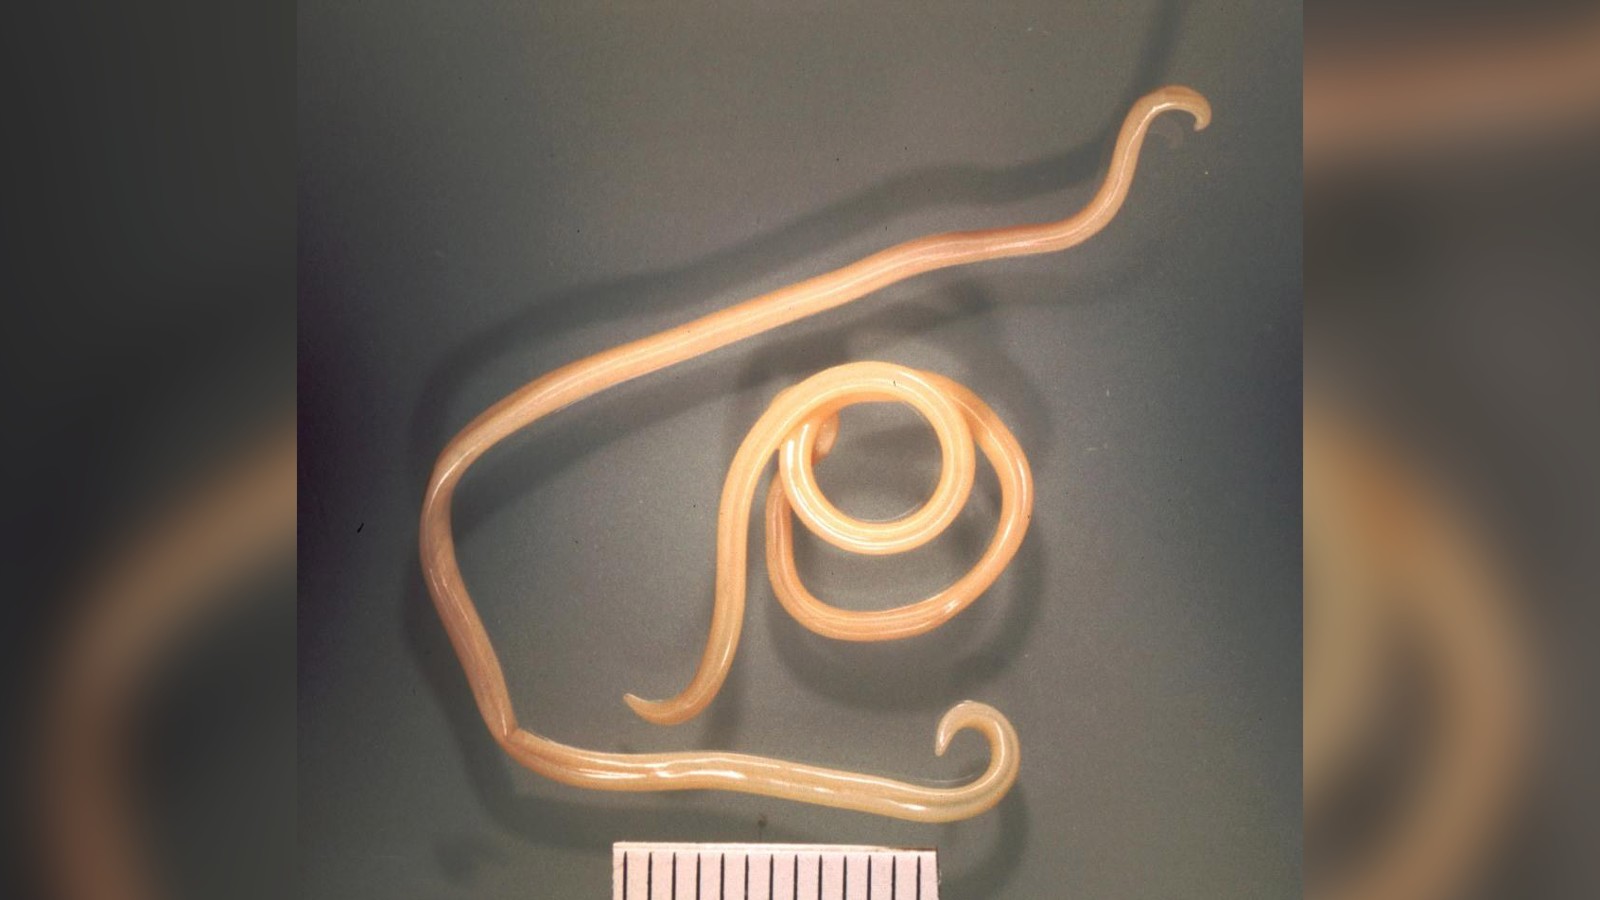 A photo of the roundworm that causes the parasitic infection Toxocariasis.